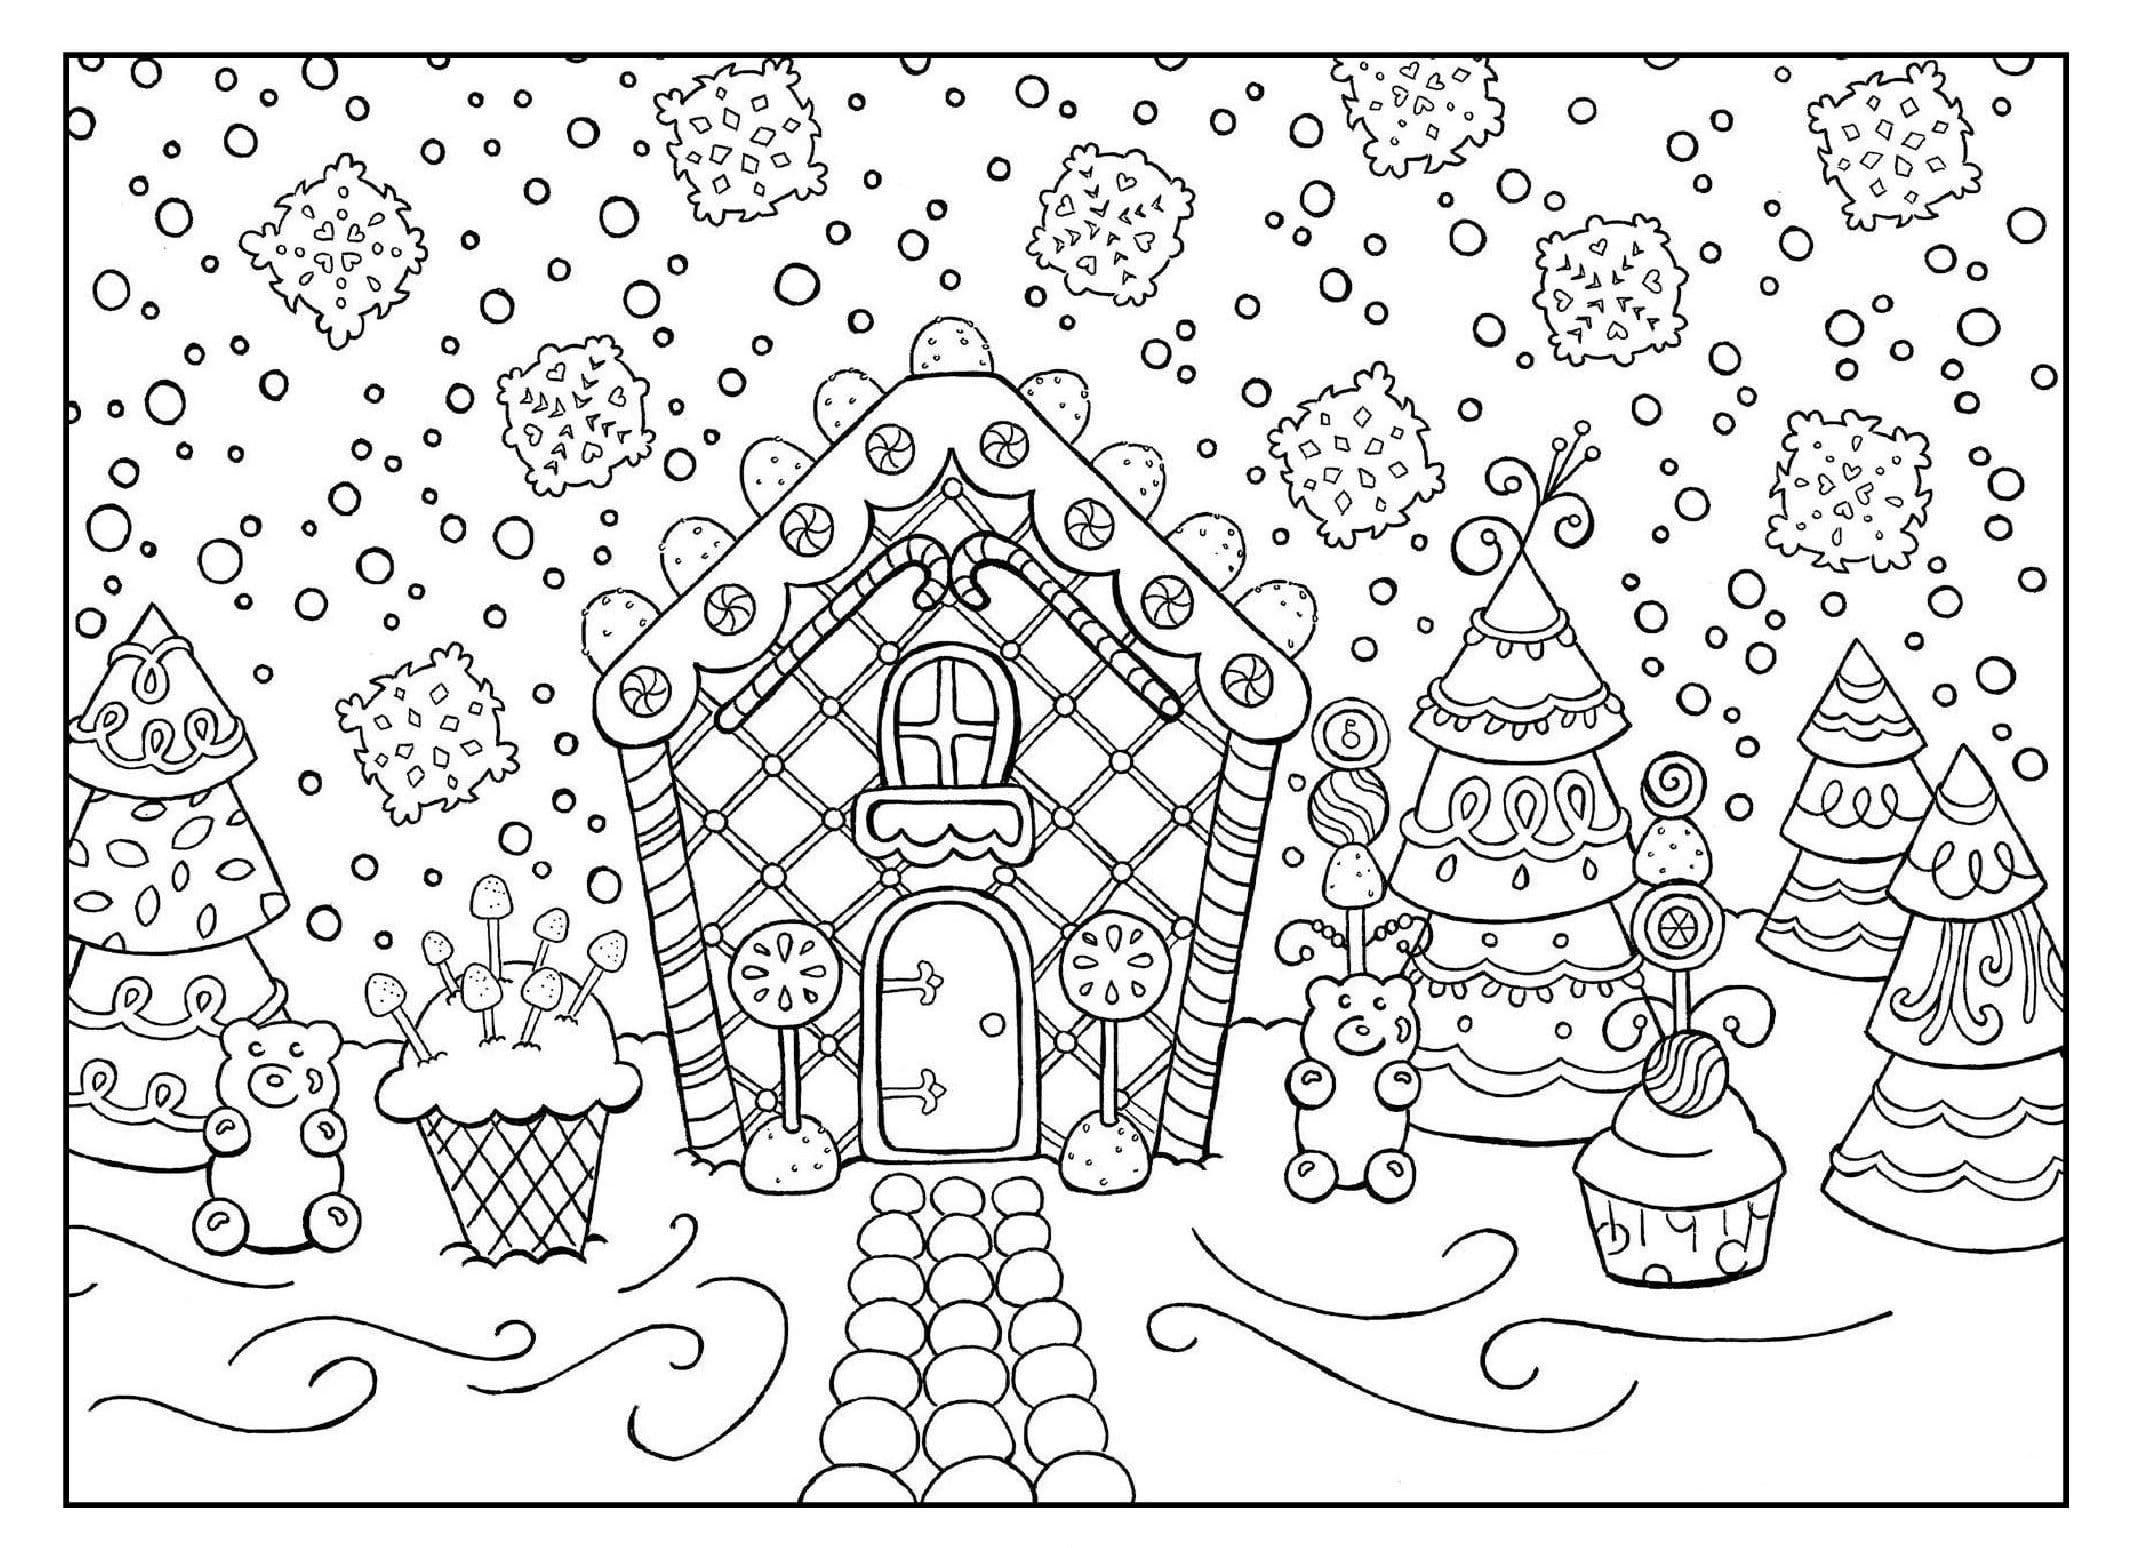 Raskrasil.com-Coloring-Pages-Gingerbread-house-102